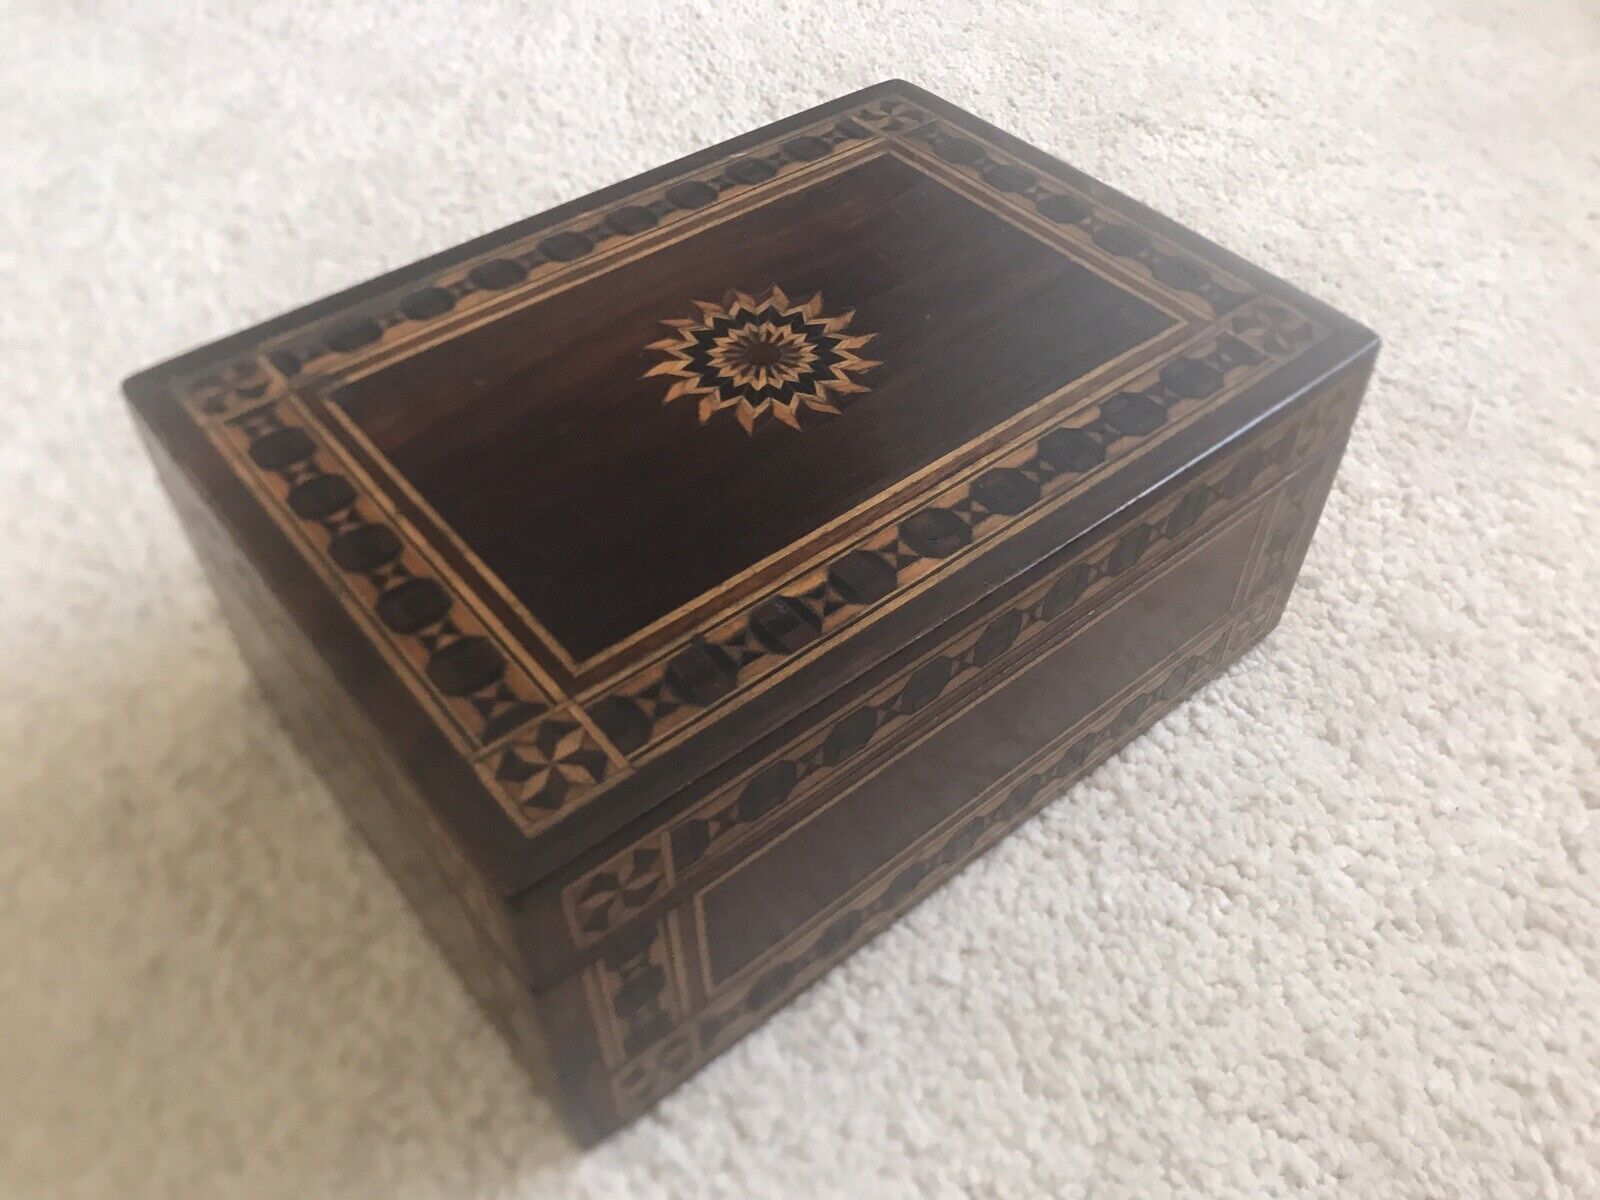 Vintage Cigar Box Humidor. Intricate Wood Marquetry Design. 8x6x4”